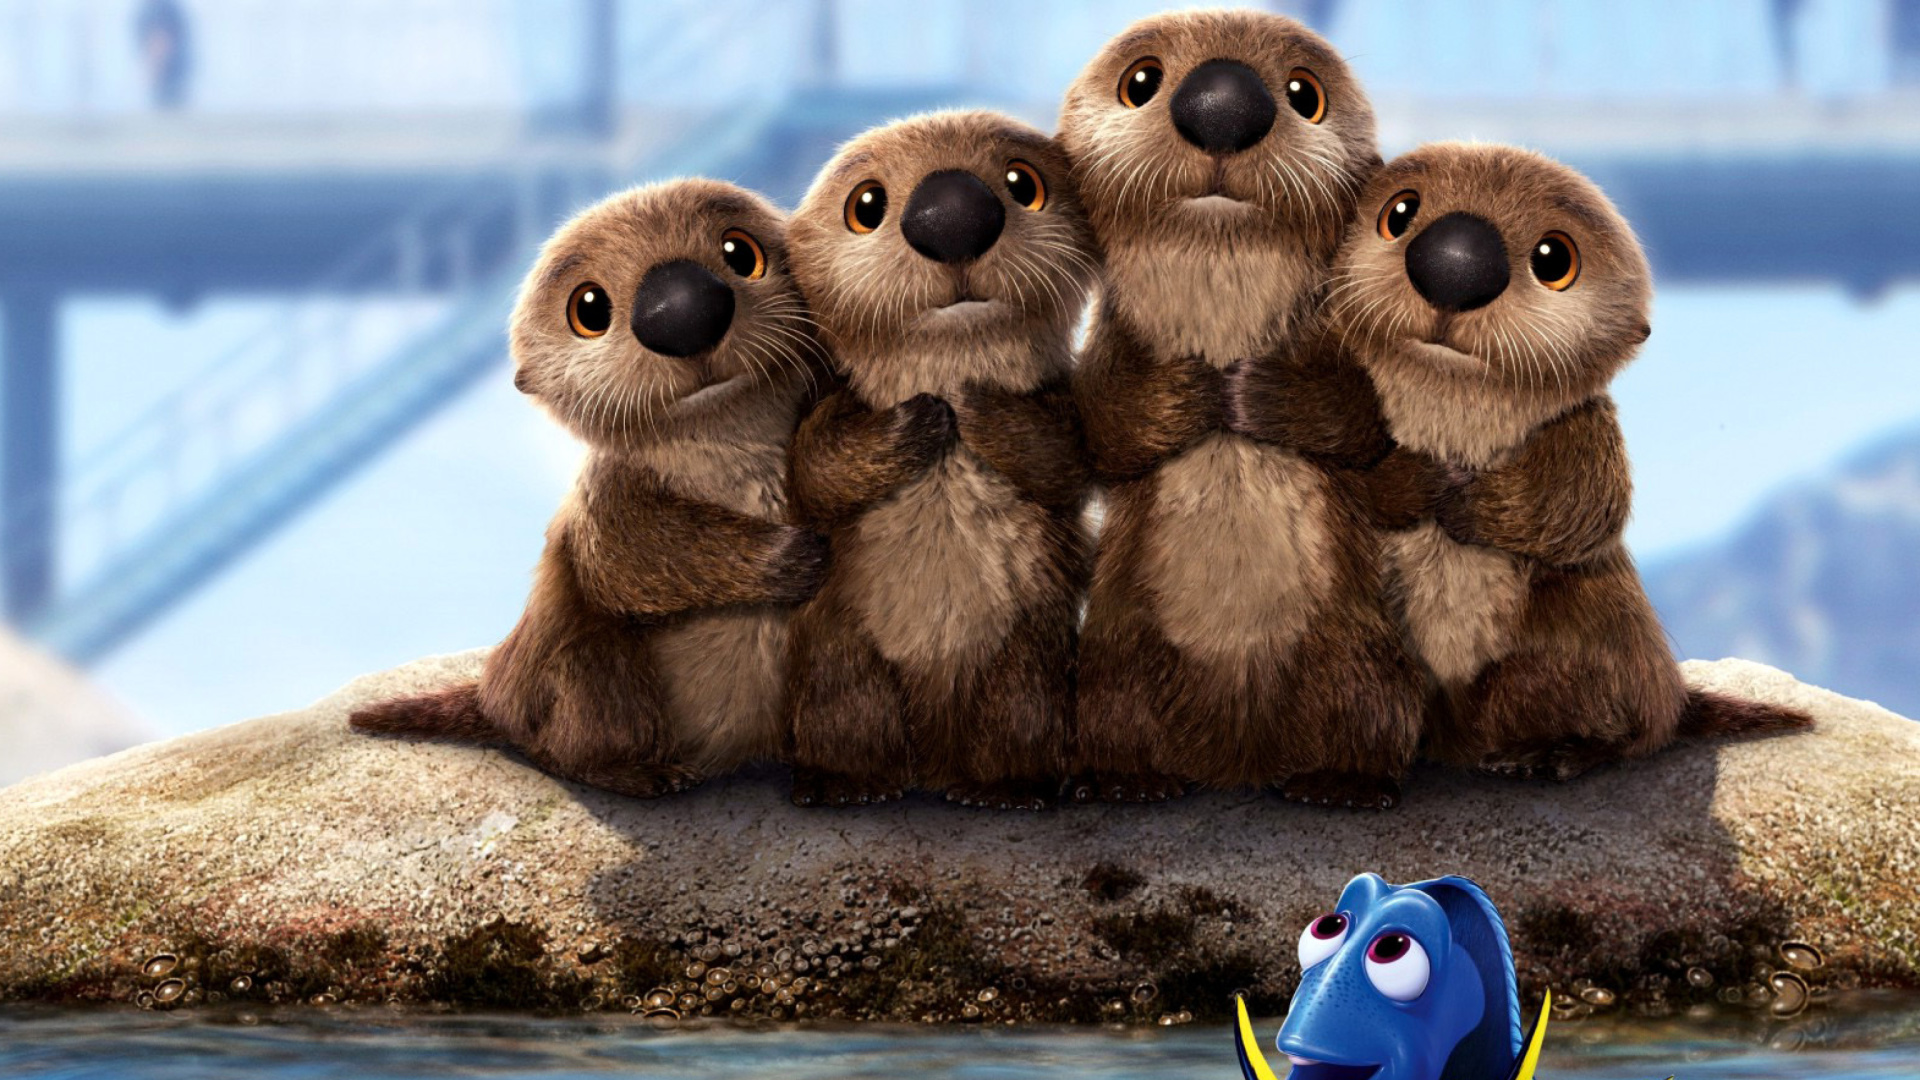 Finding Dory 3D Film with Beavers wallpaper 1920x1080